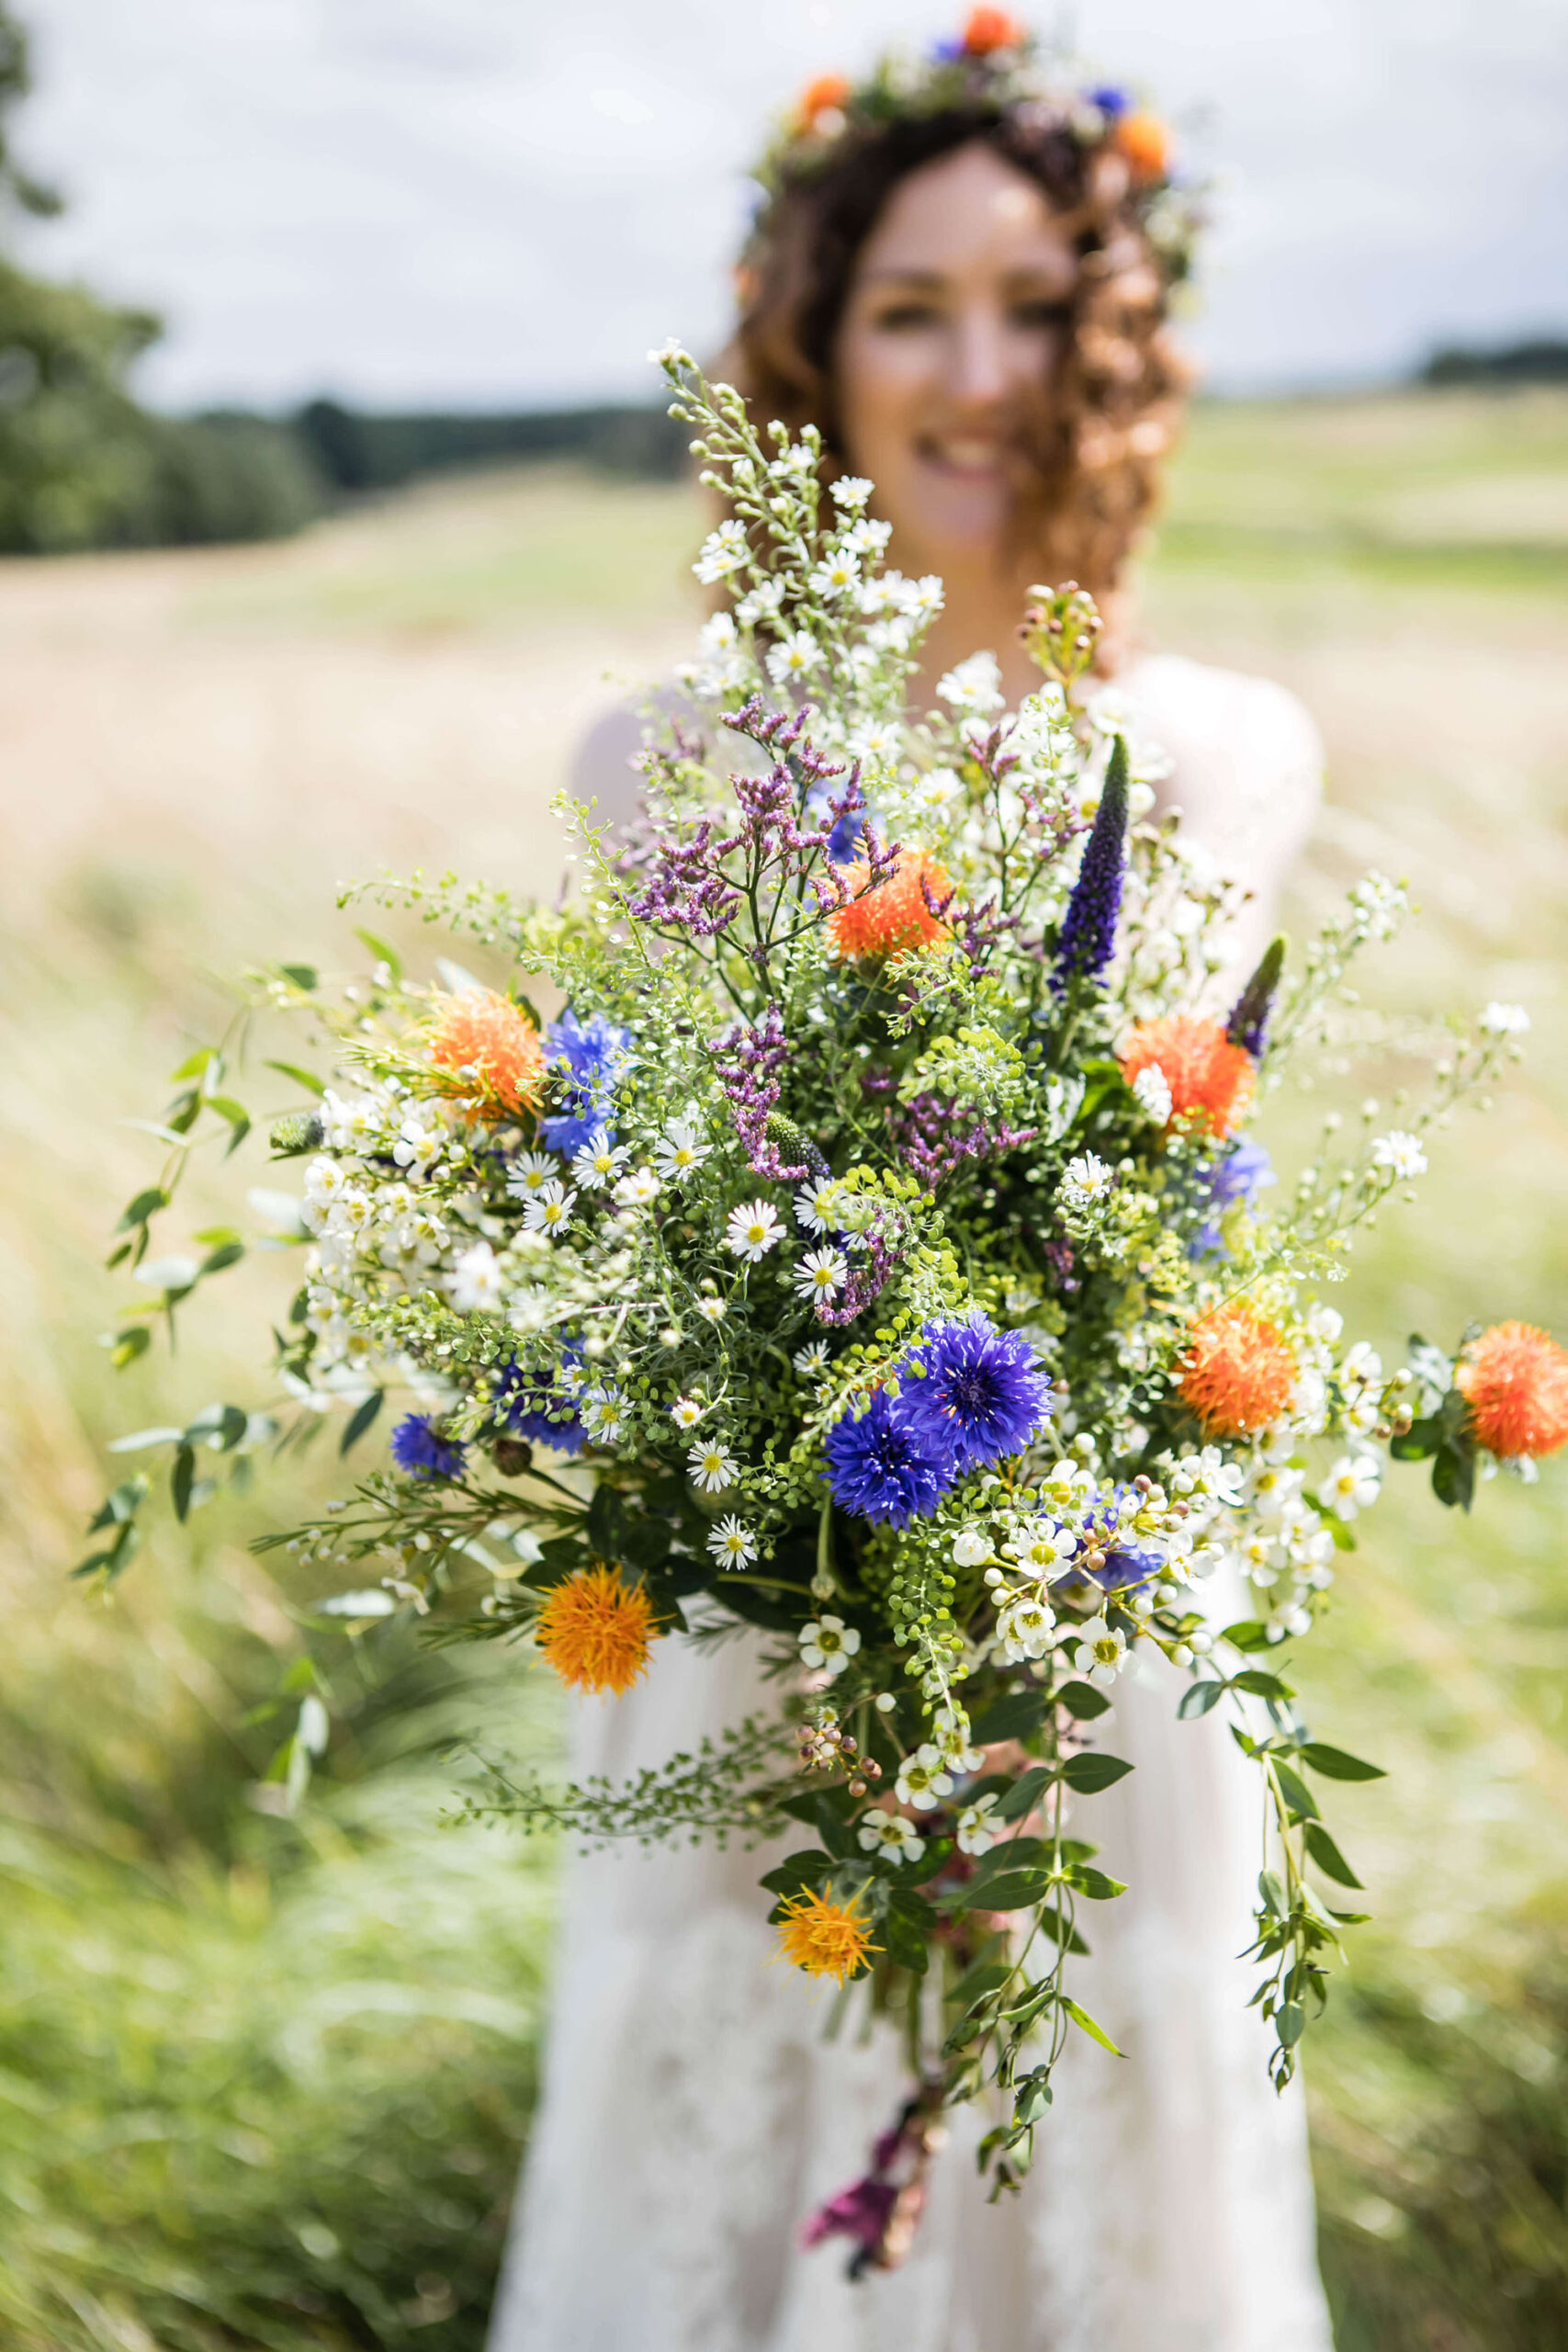 Gorgeous and colourful wildflower bouquet held by a bride, by Erika Tanith Photography